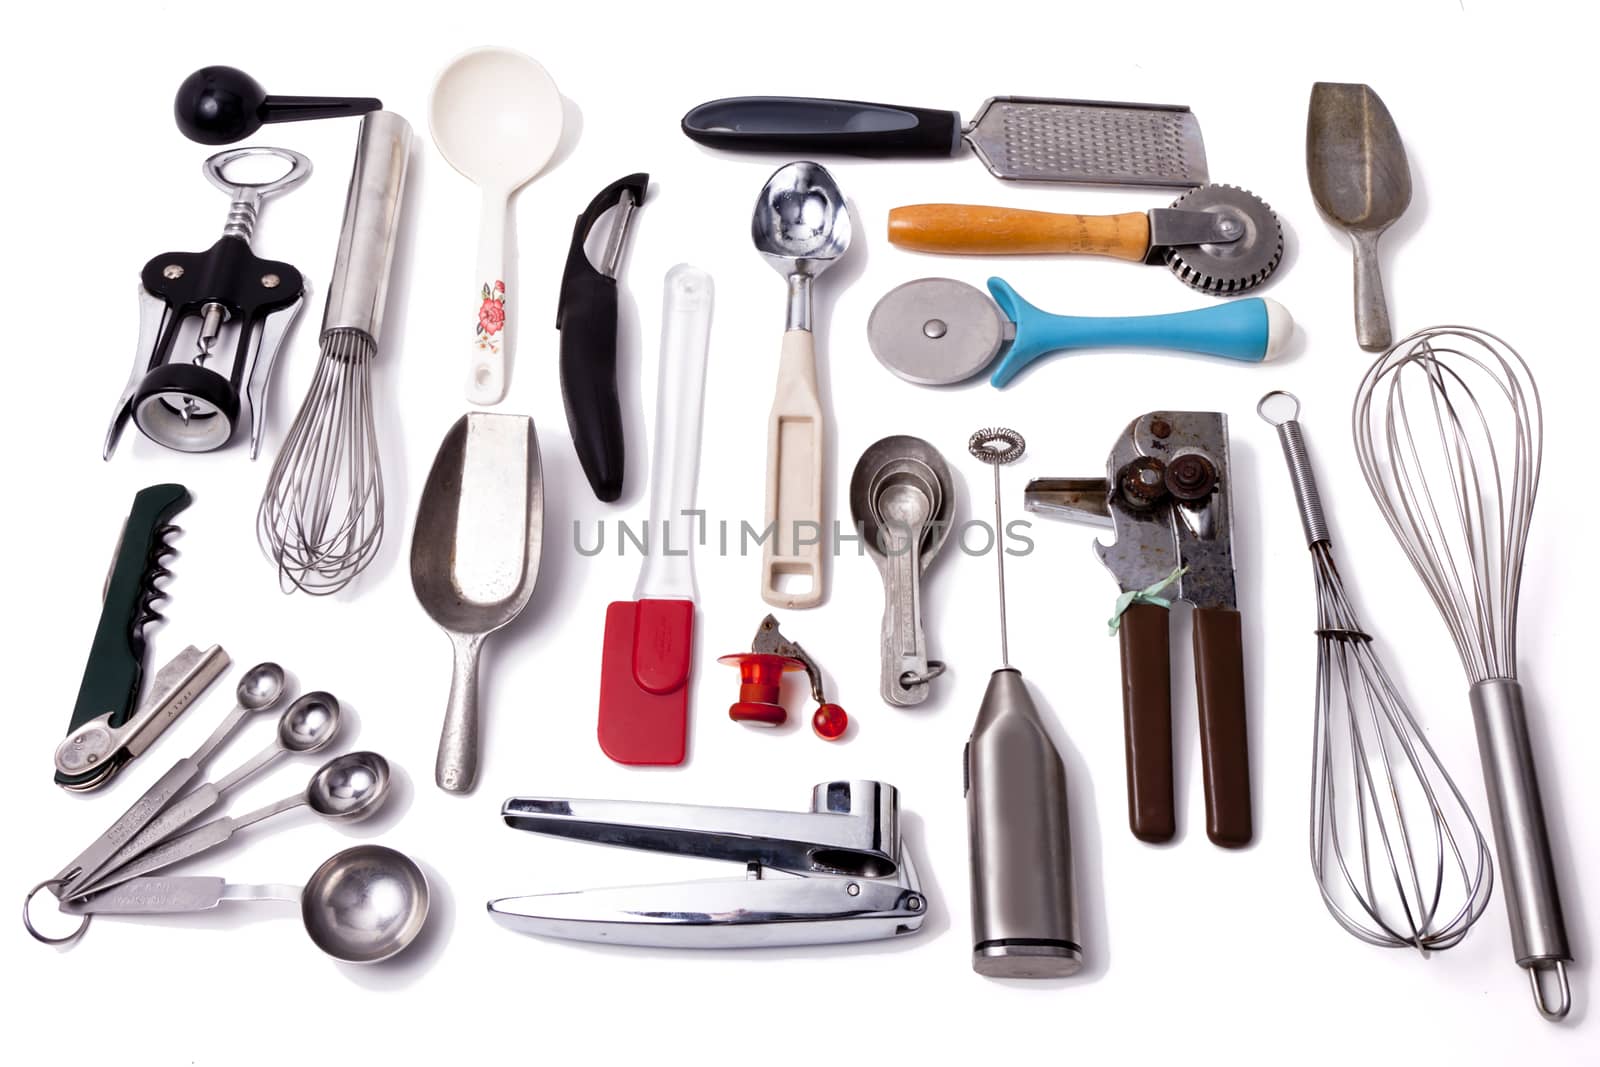 A collection of kitchen tools and utensils on a white background.